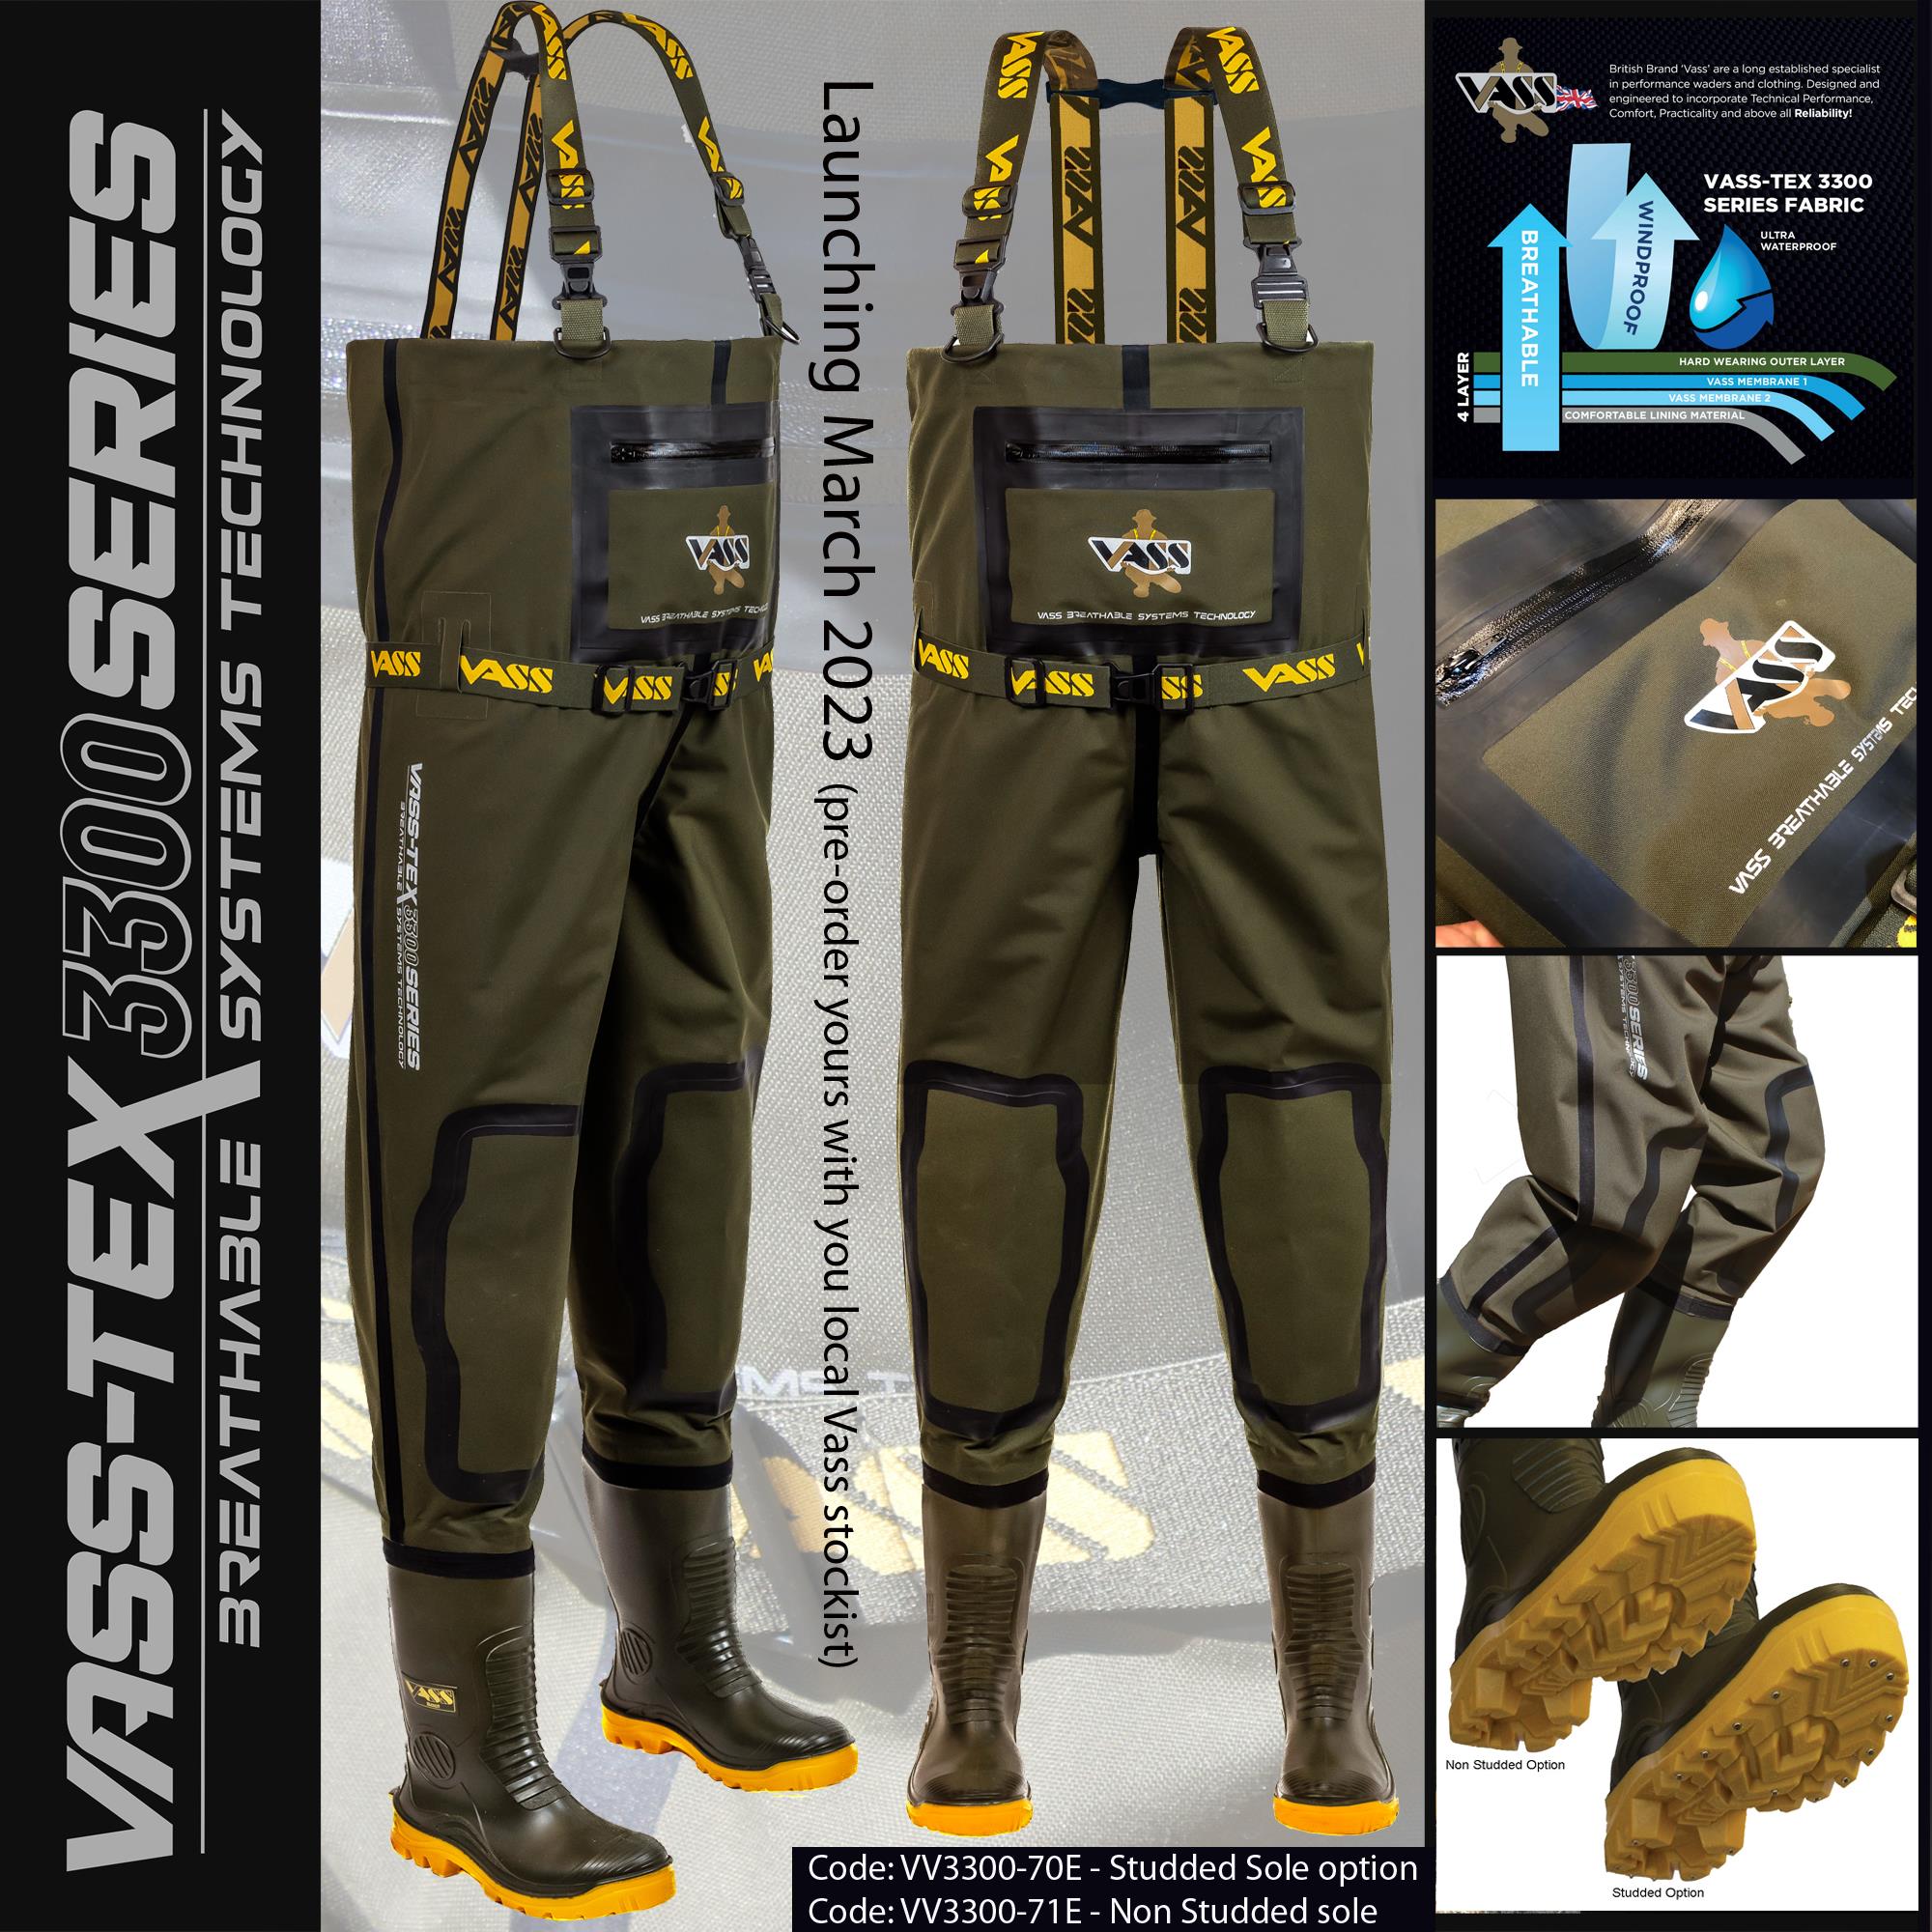 Snowbee STORMSURE BOOT & WADER REPAIR KIT, Categories \ Waders/Boots for  fishing \ Accessories